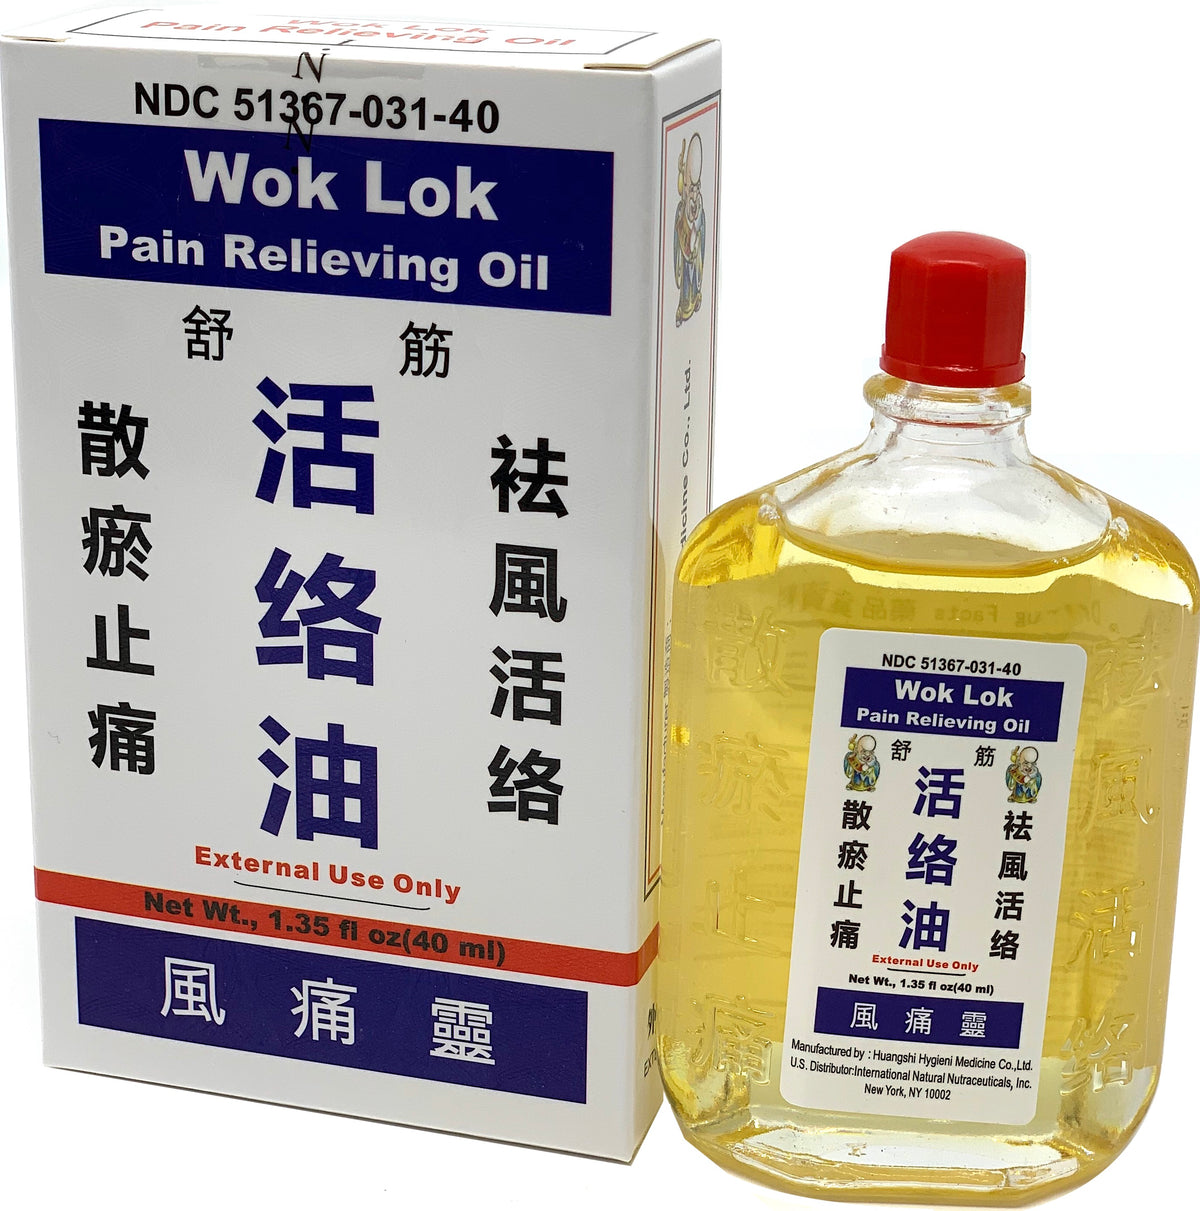 Wok Lok Pain Relieving Oil